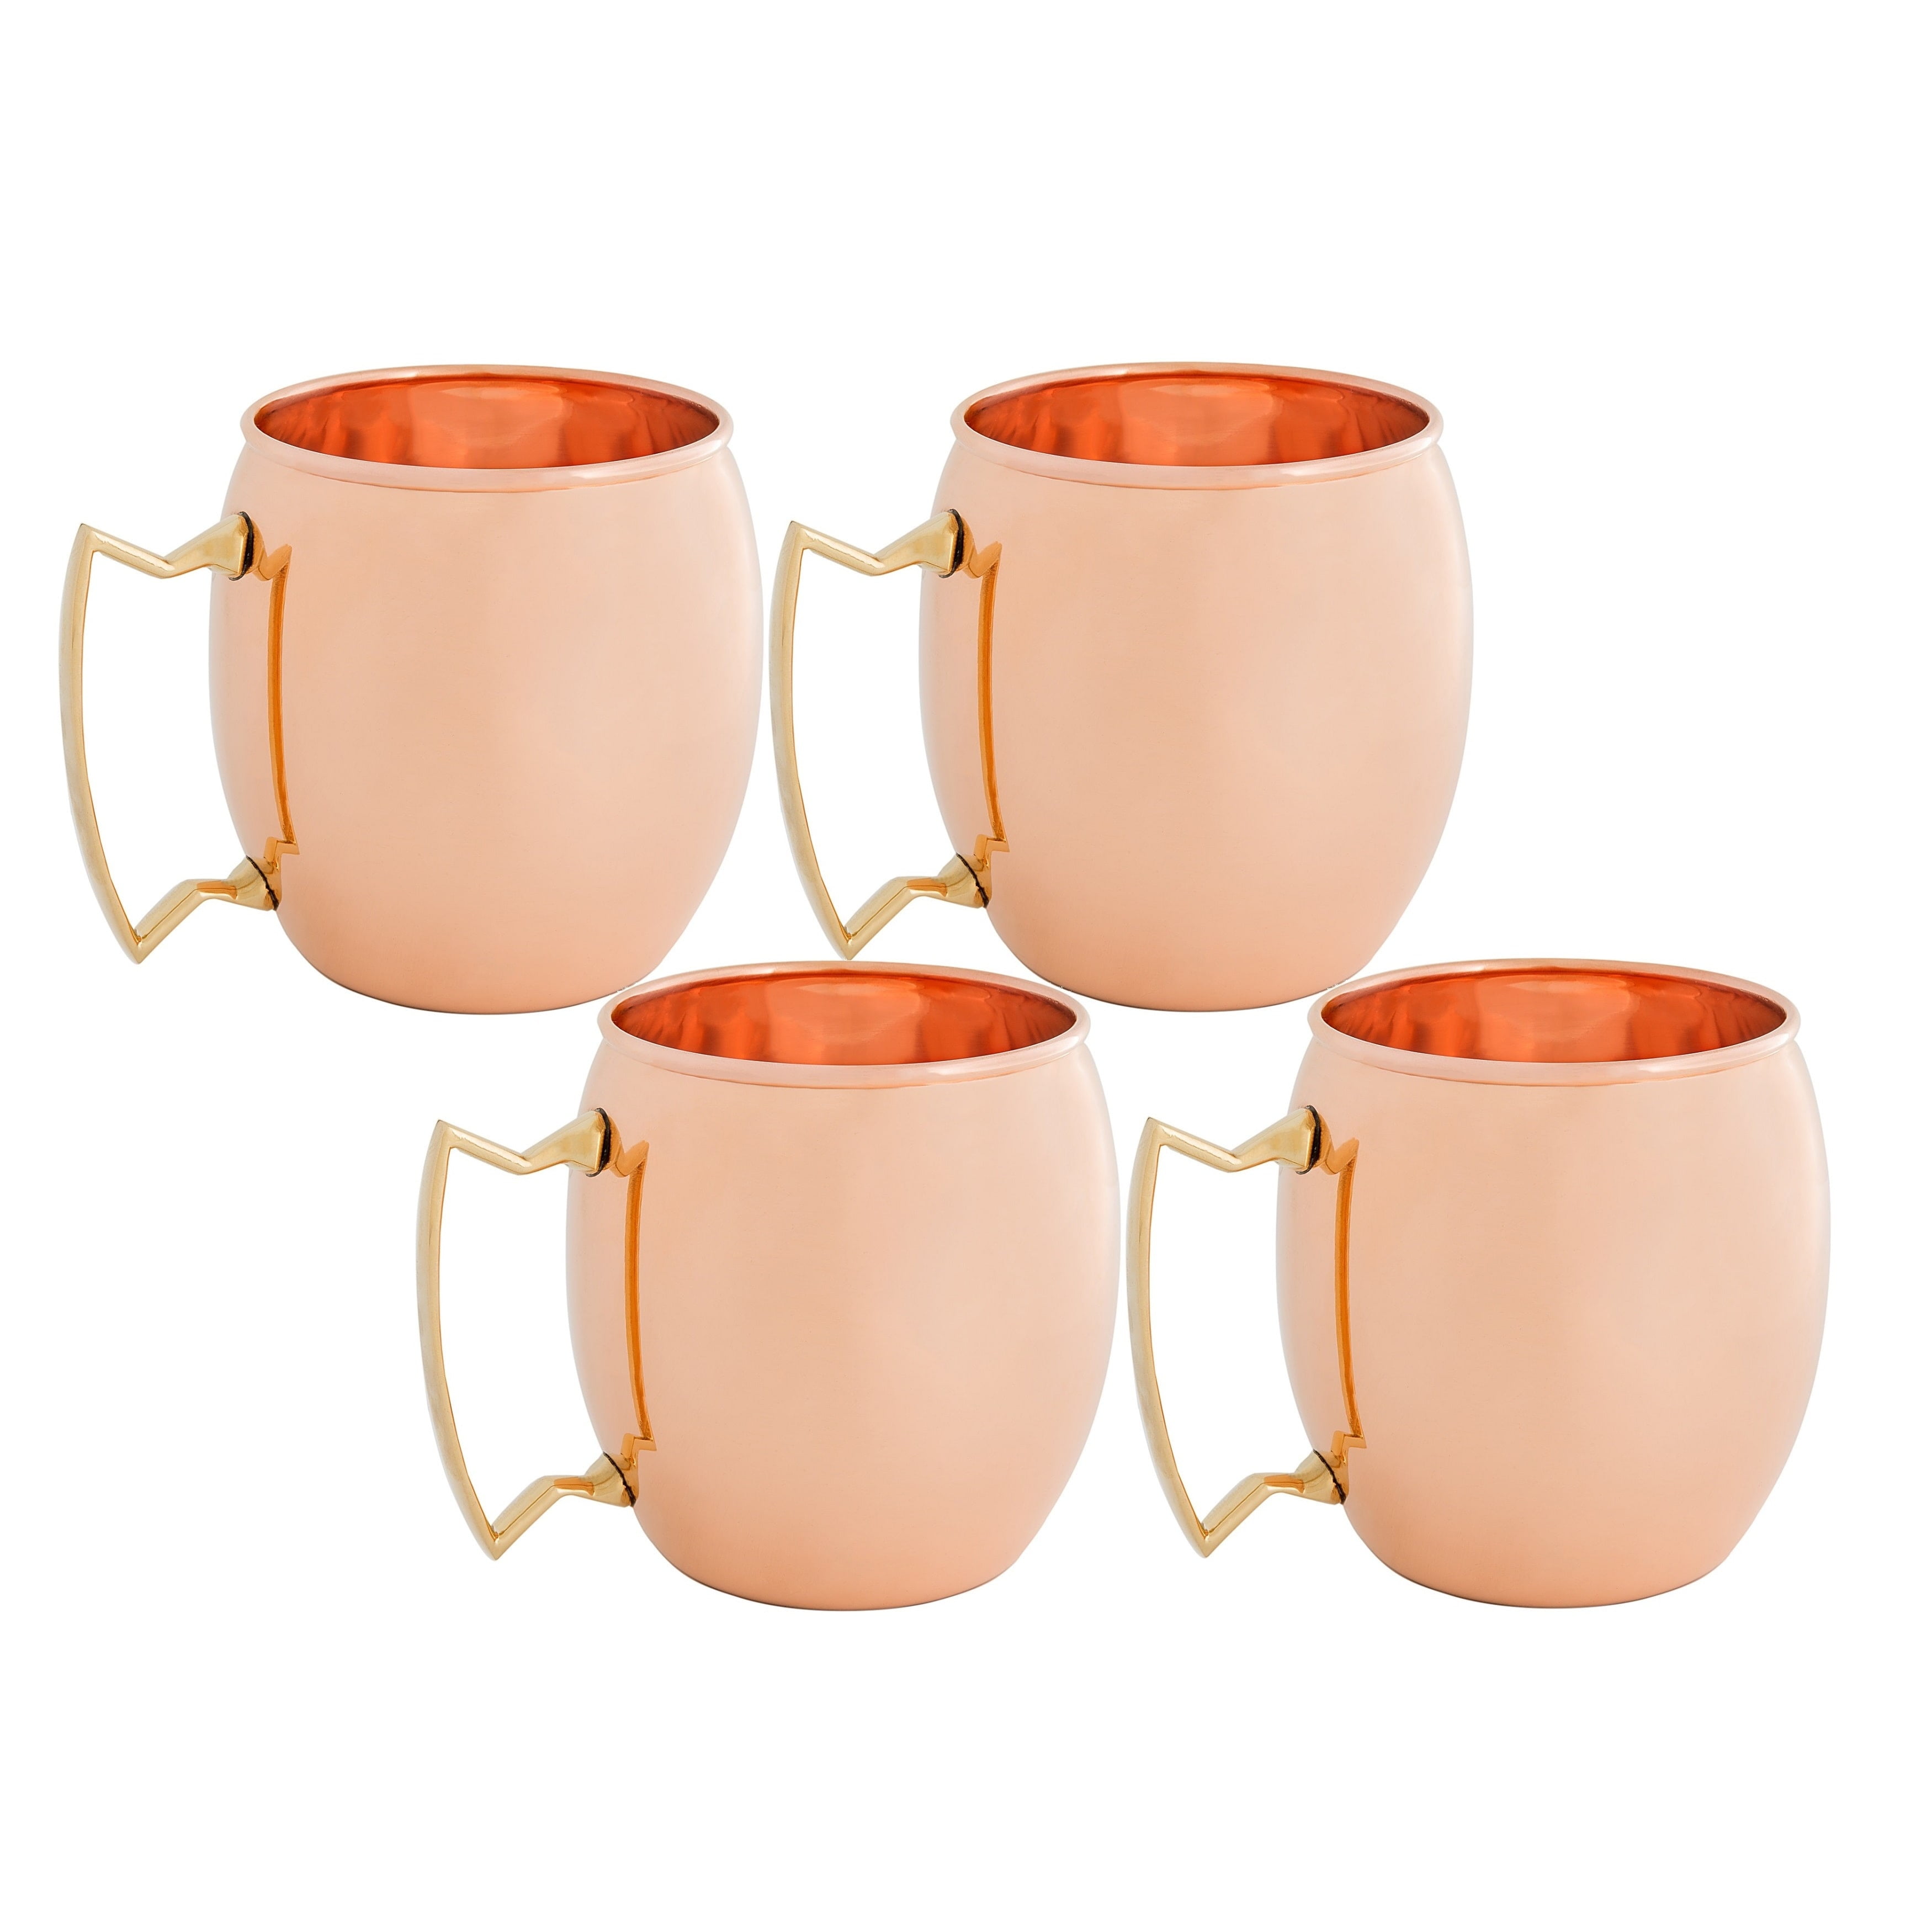 OGGI Moscow Mule Pure Solid Copper Handled Drinking Cups 16 oz Mugs Set of 8 